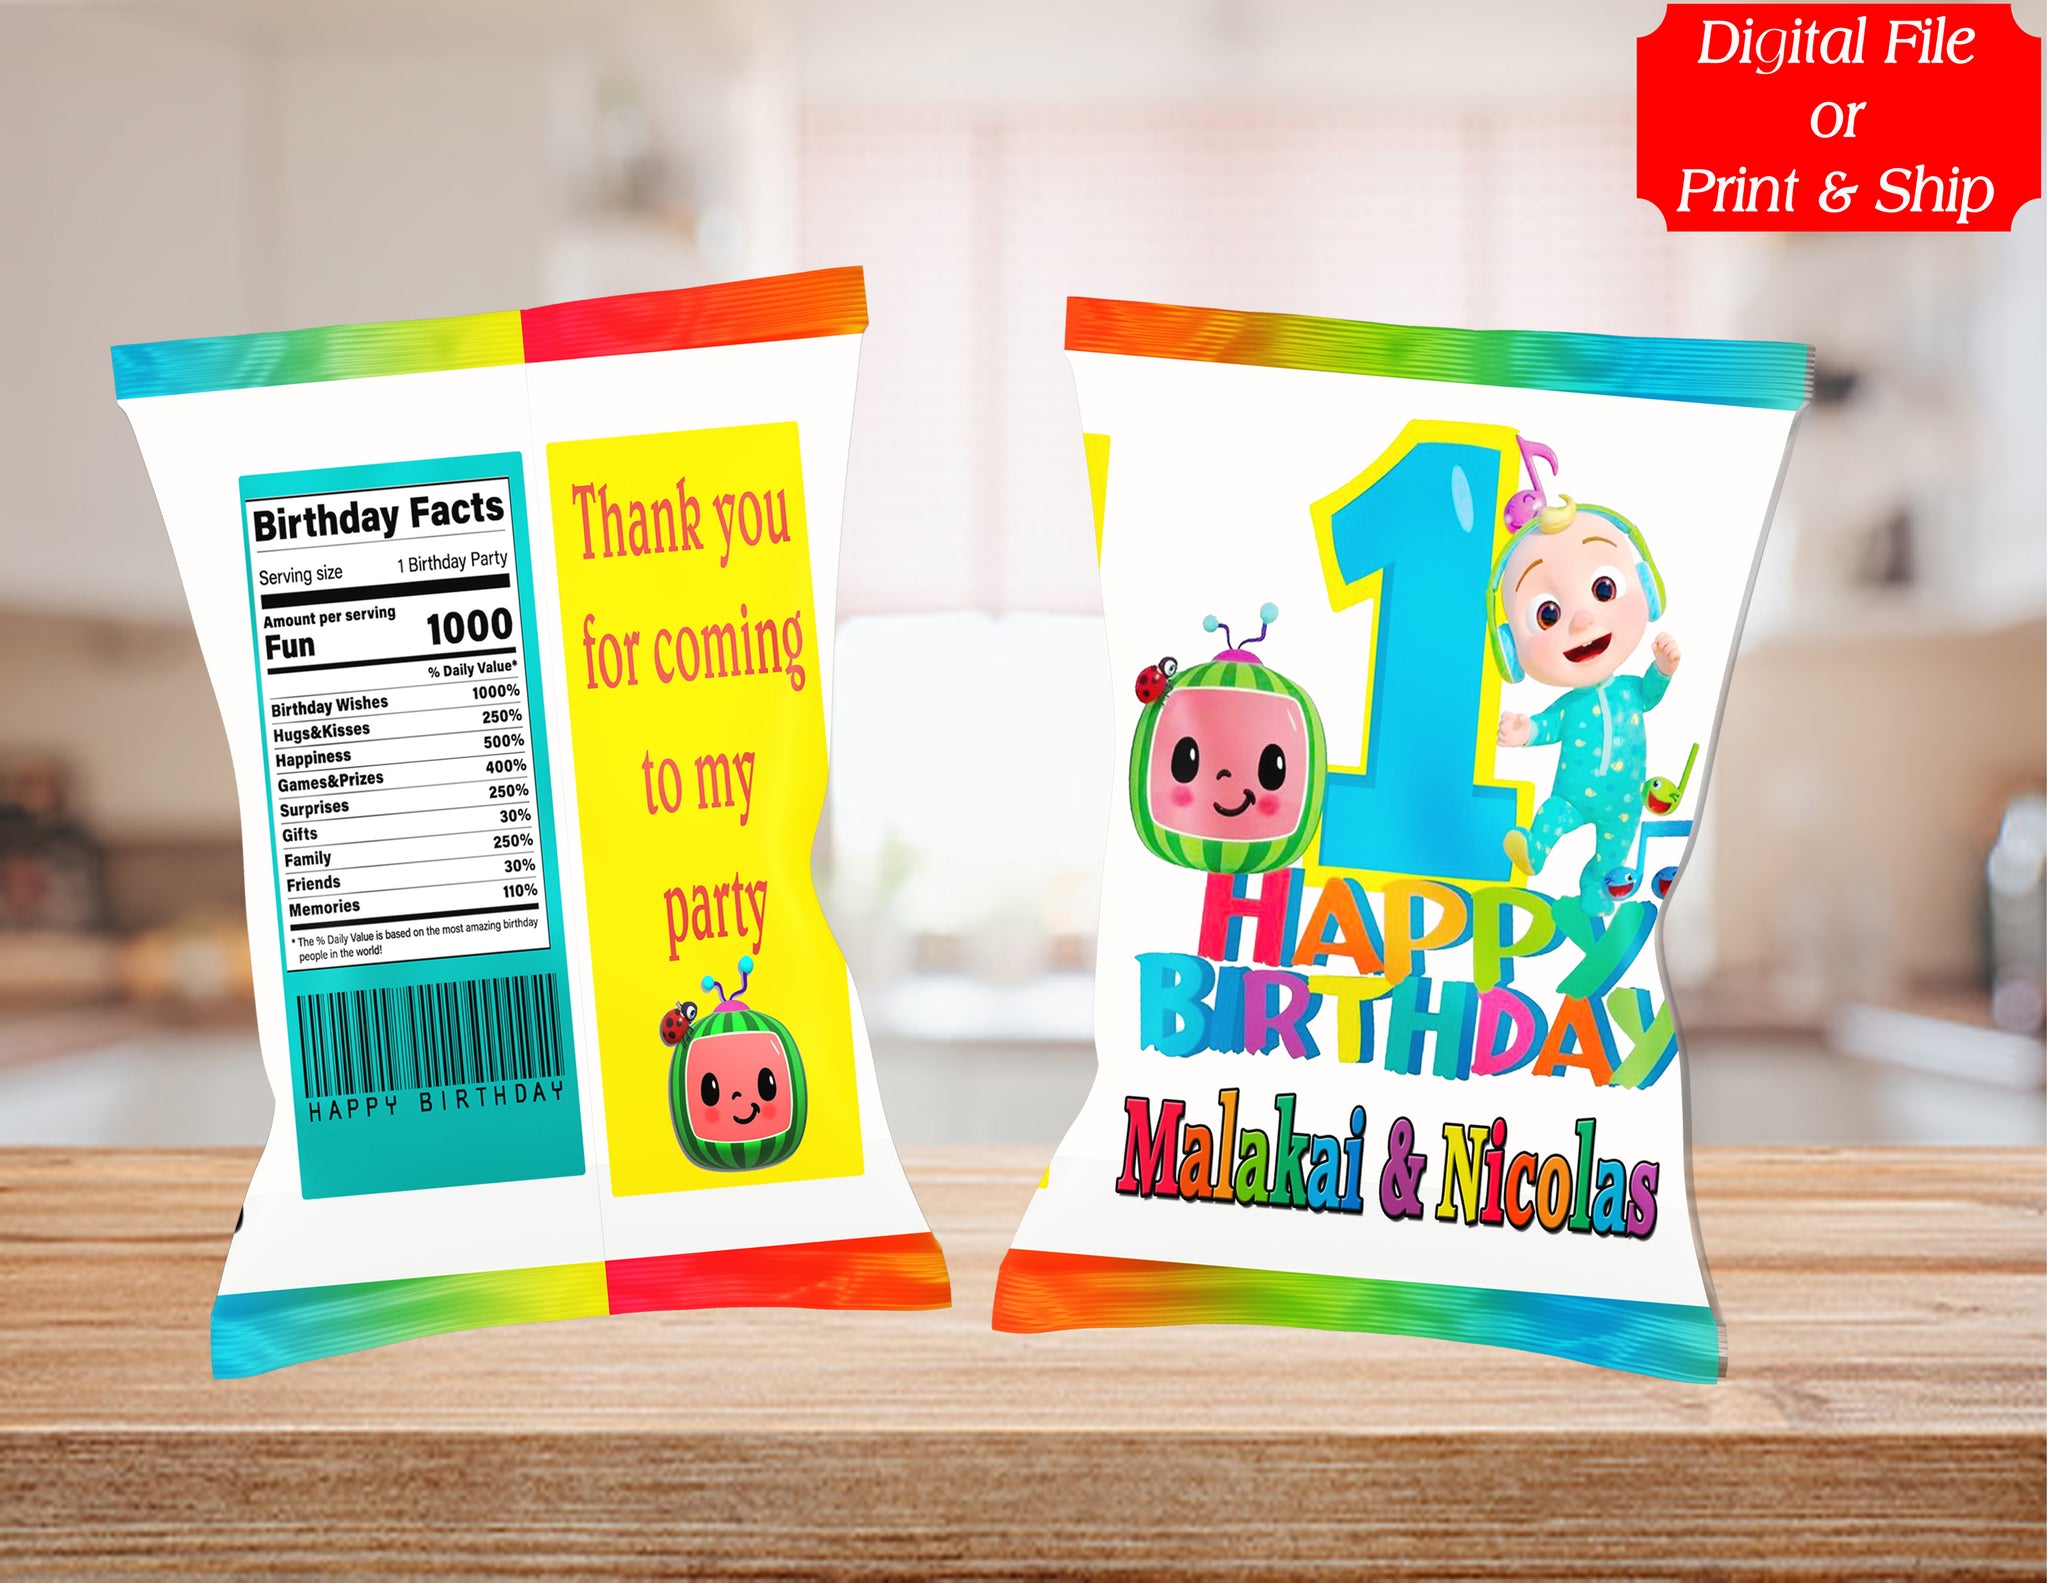 (12) Personalized COCOMELON Chip Candy Treat Bags Party Favors Printed or D. File